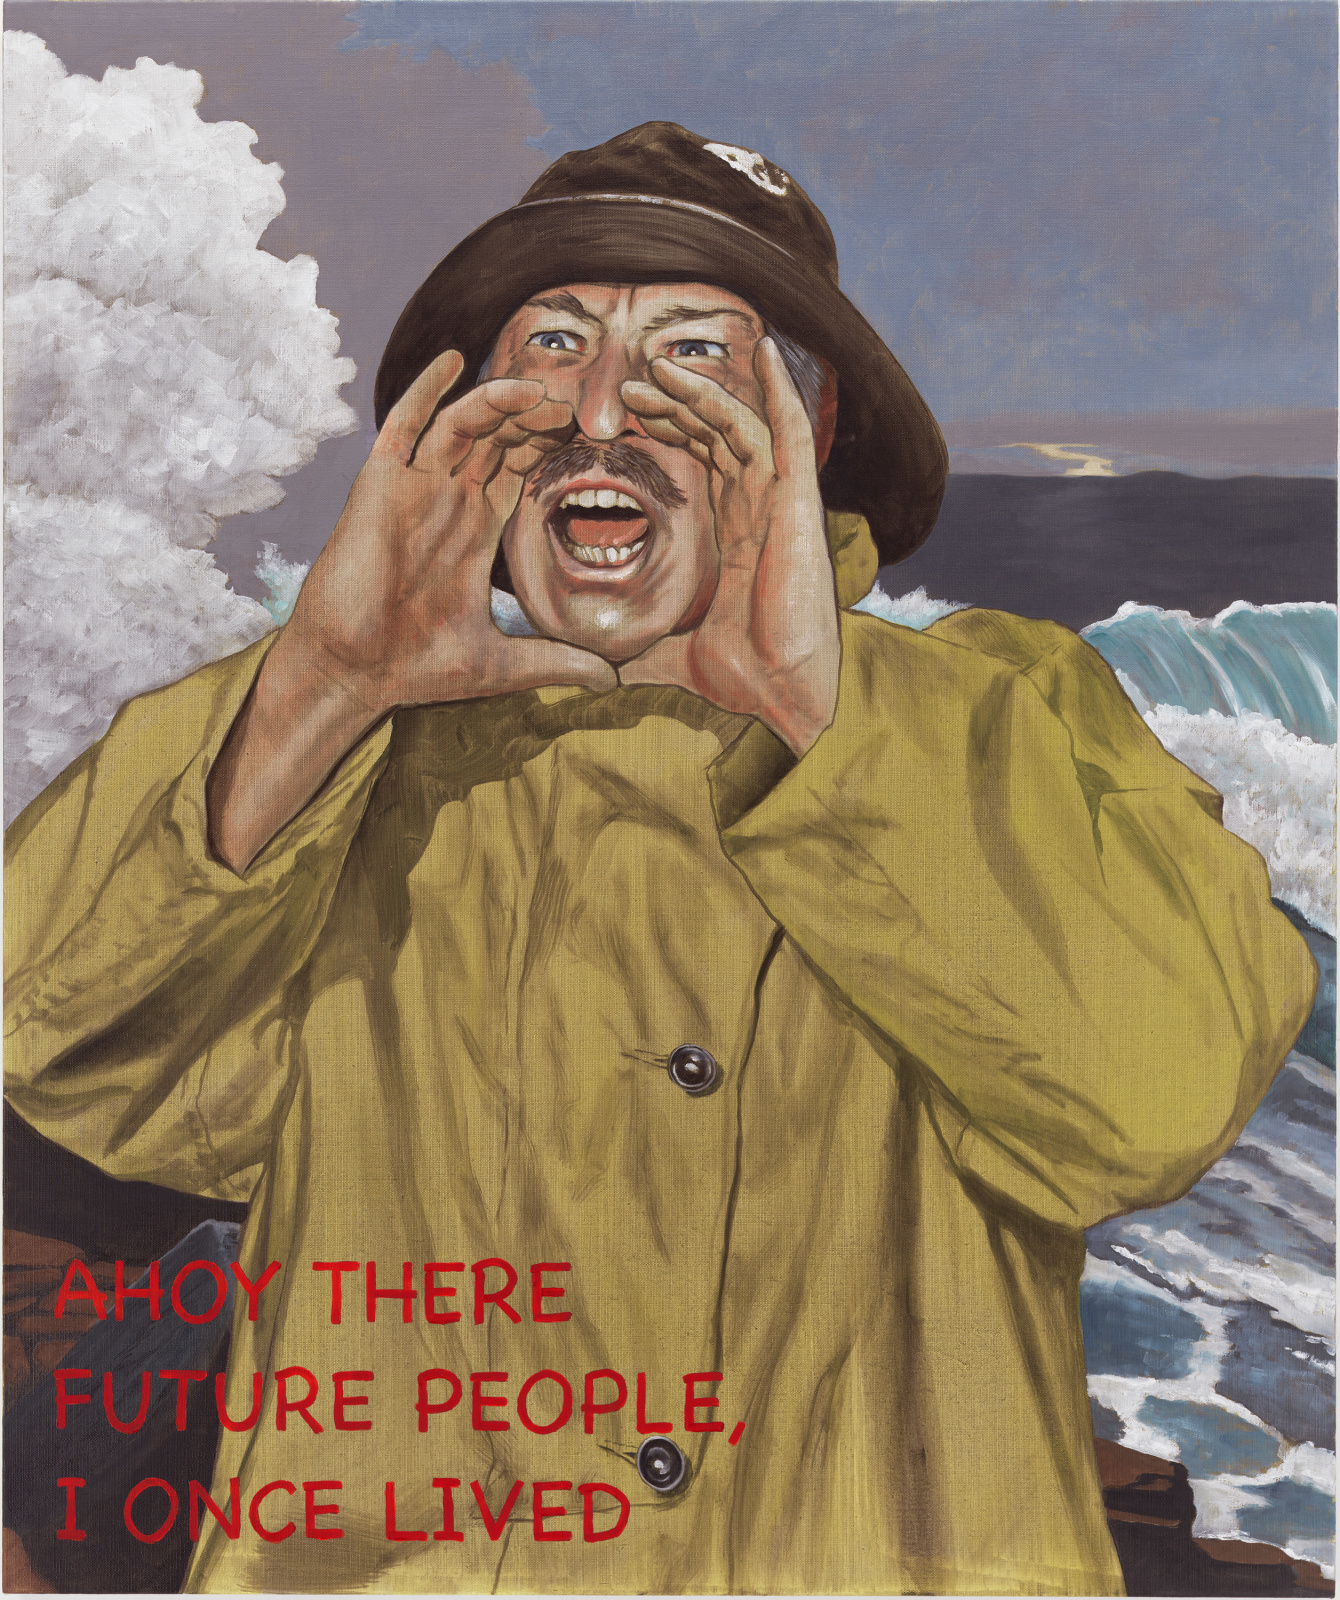 Portrait of a man in a yellow rain jacket. His hands are cupped around his mouth, he is yelling. the ocean is the back ground. in the lower left corner, there is test painted in red that reads &quot;Ahoy there future people, I once lived.&quot;